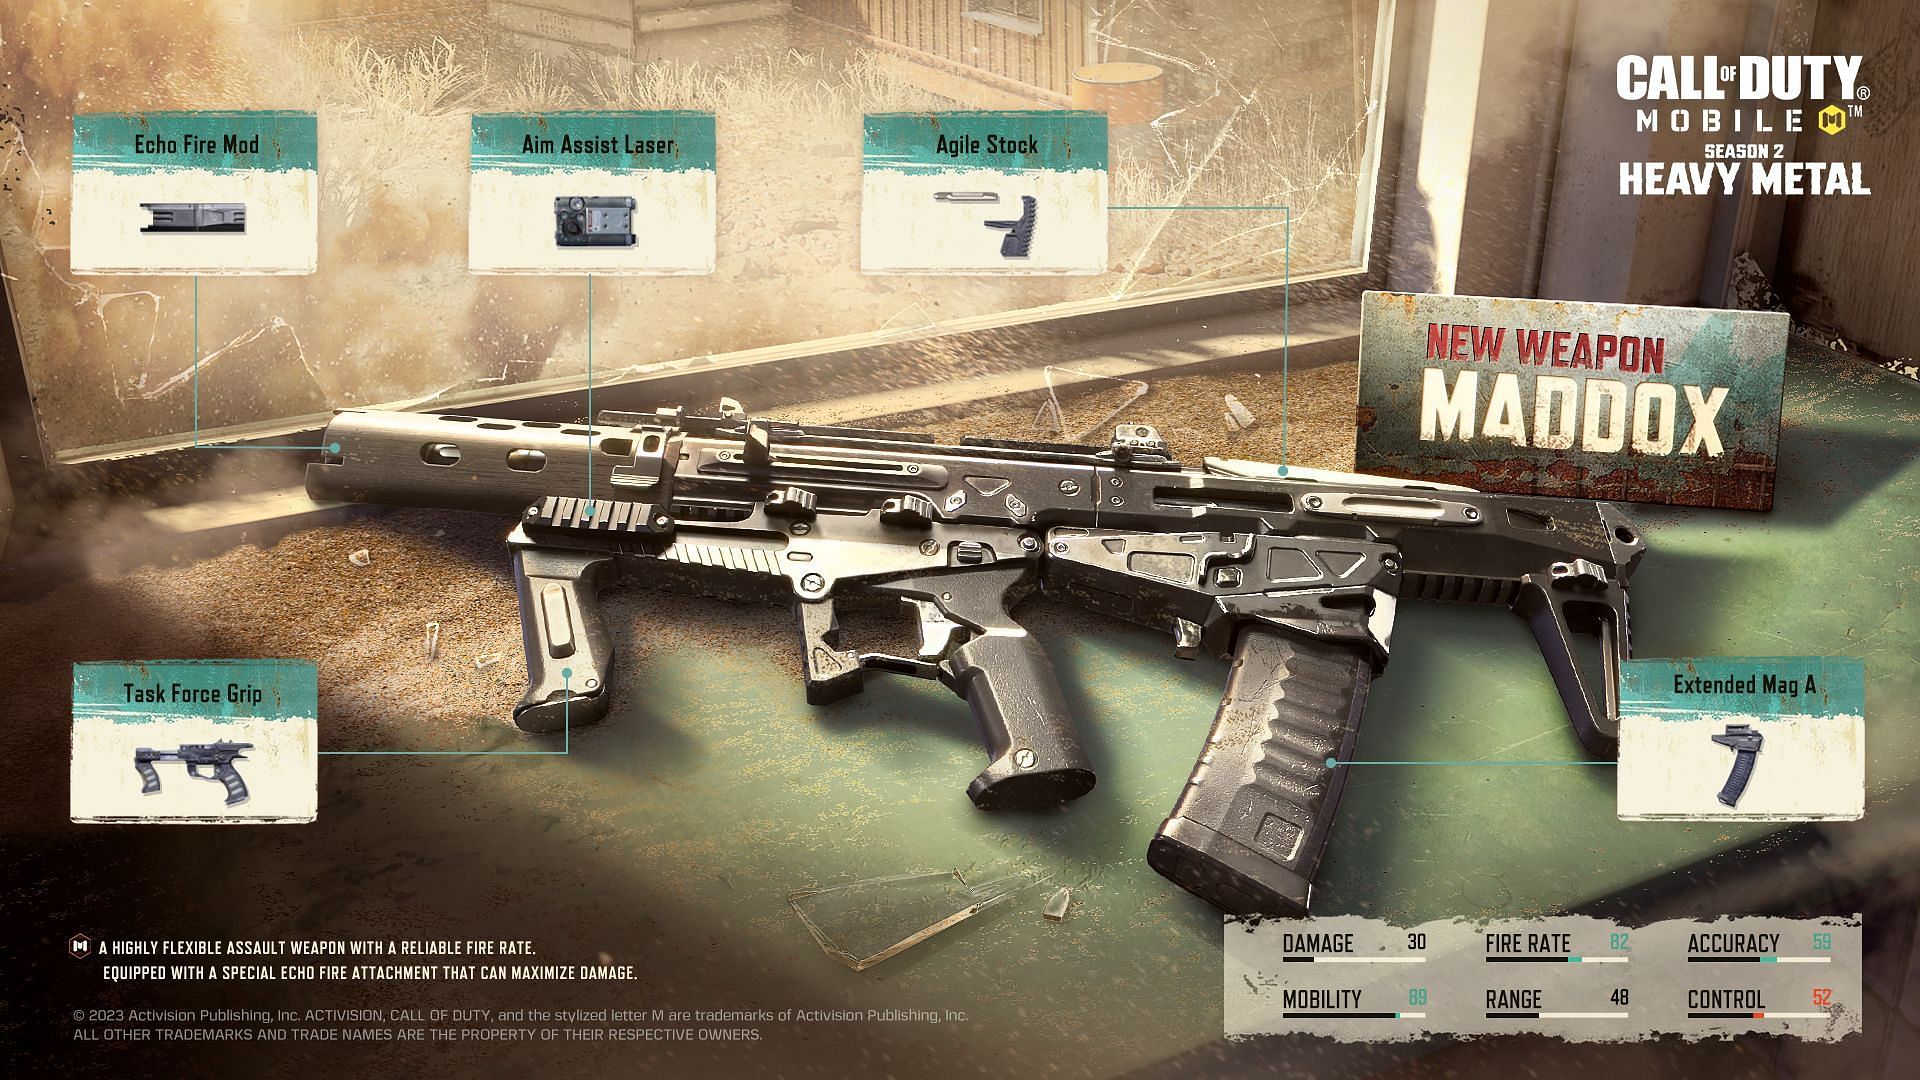 COD Mobile new gun Maddox has been added in Season 2 (Image via Activision)